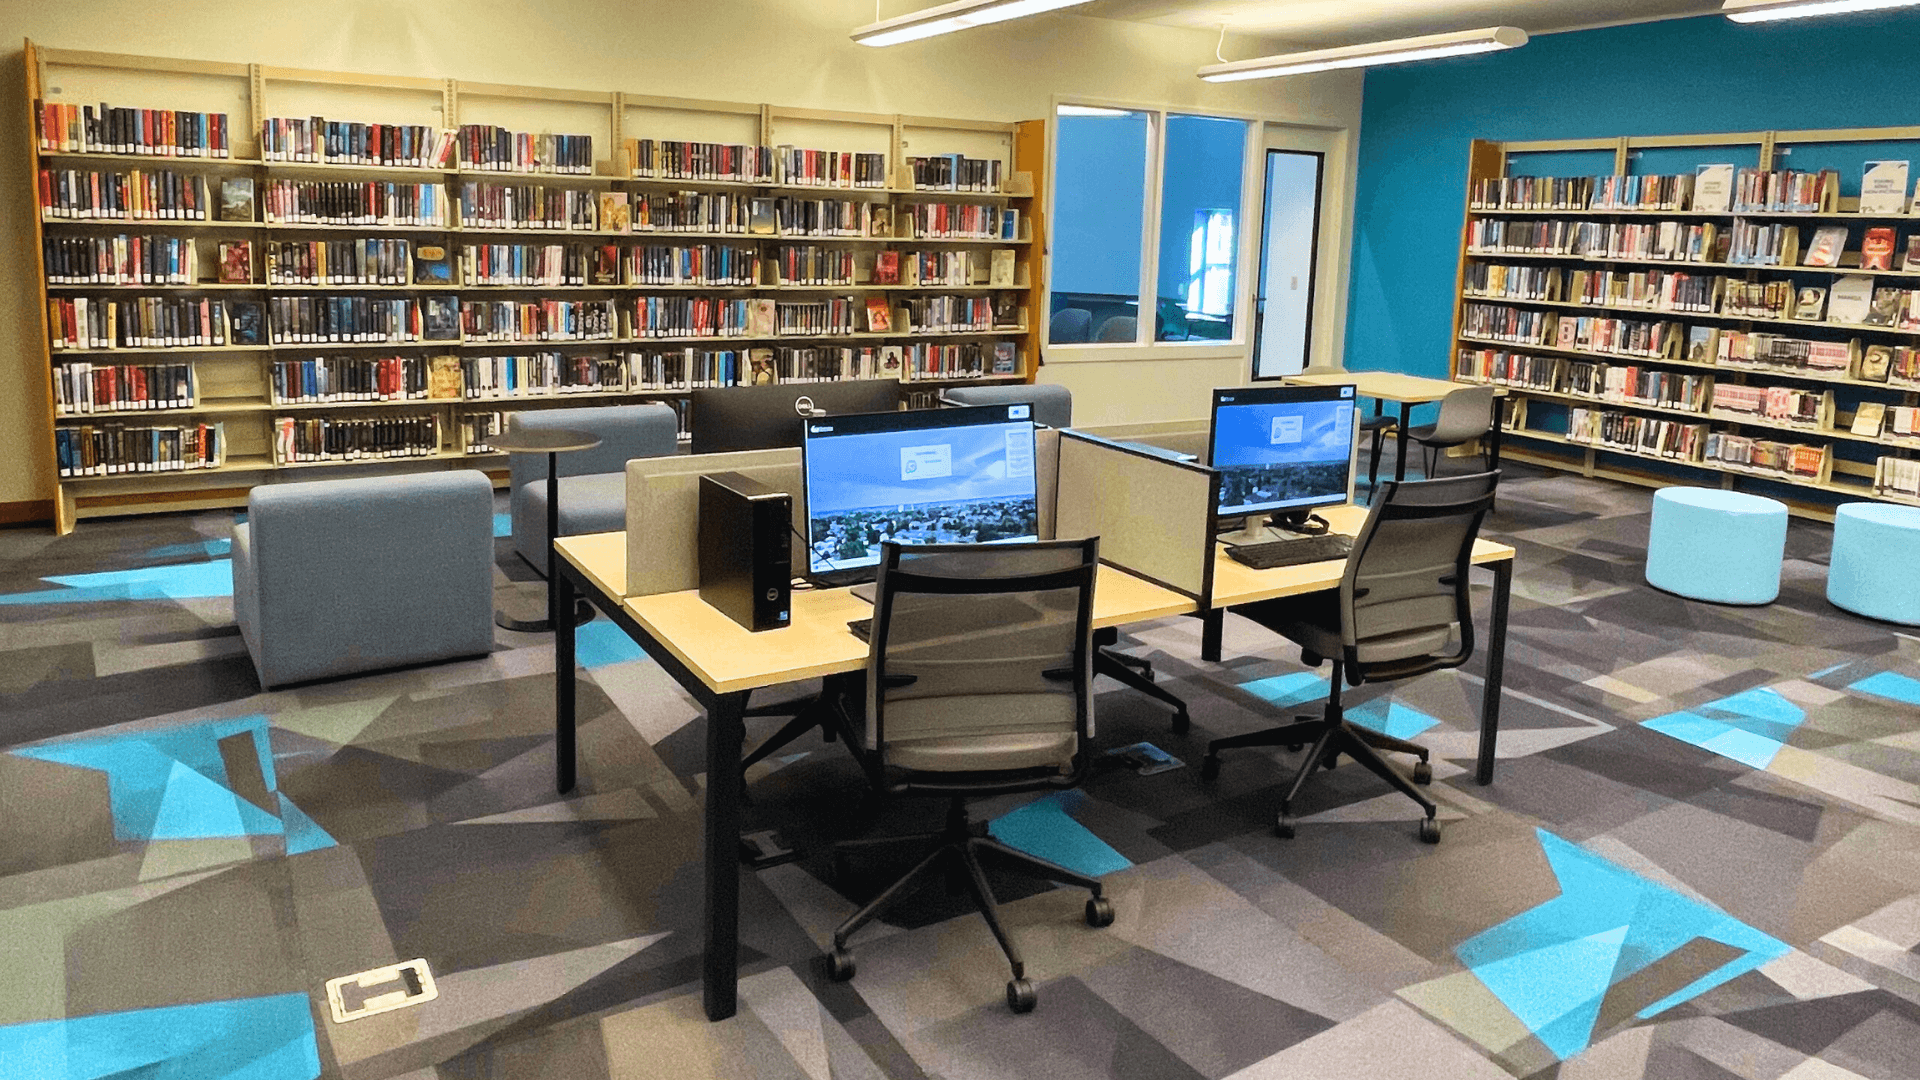 Computers and books in a library